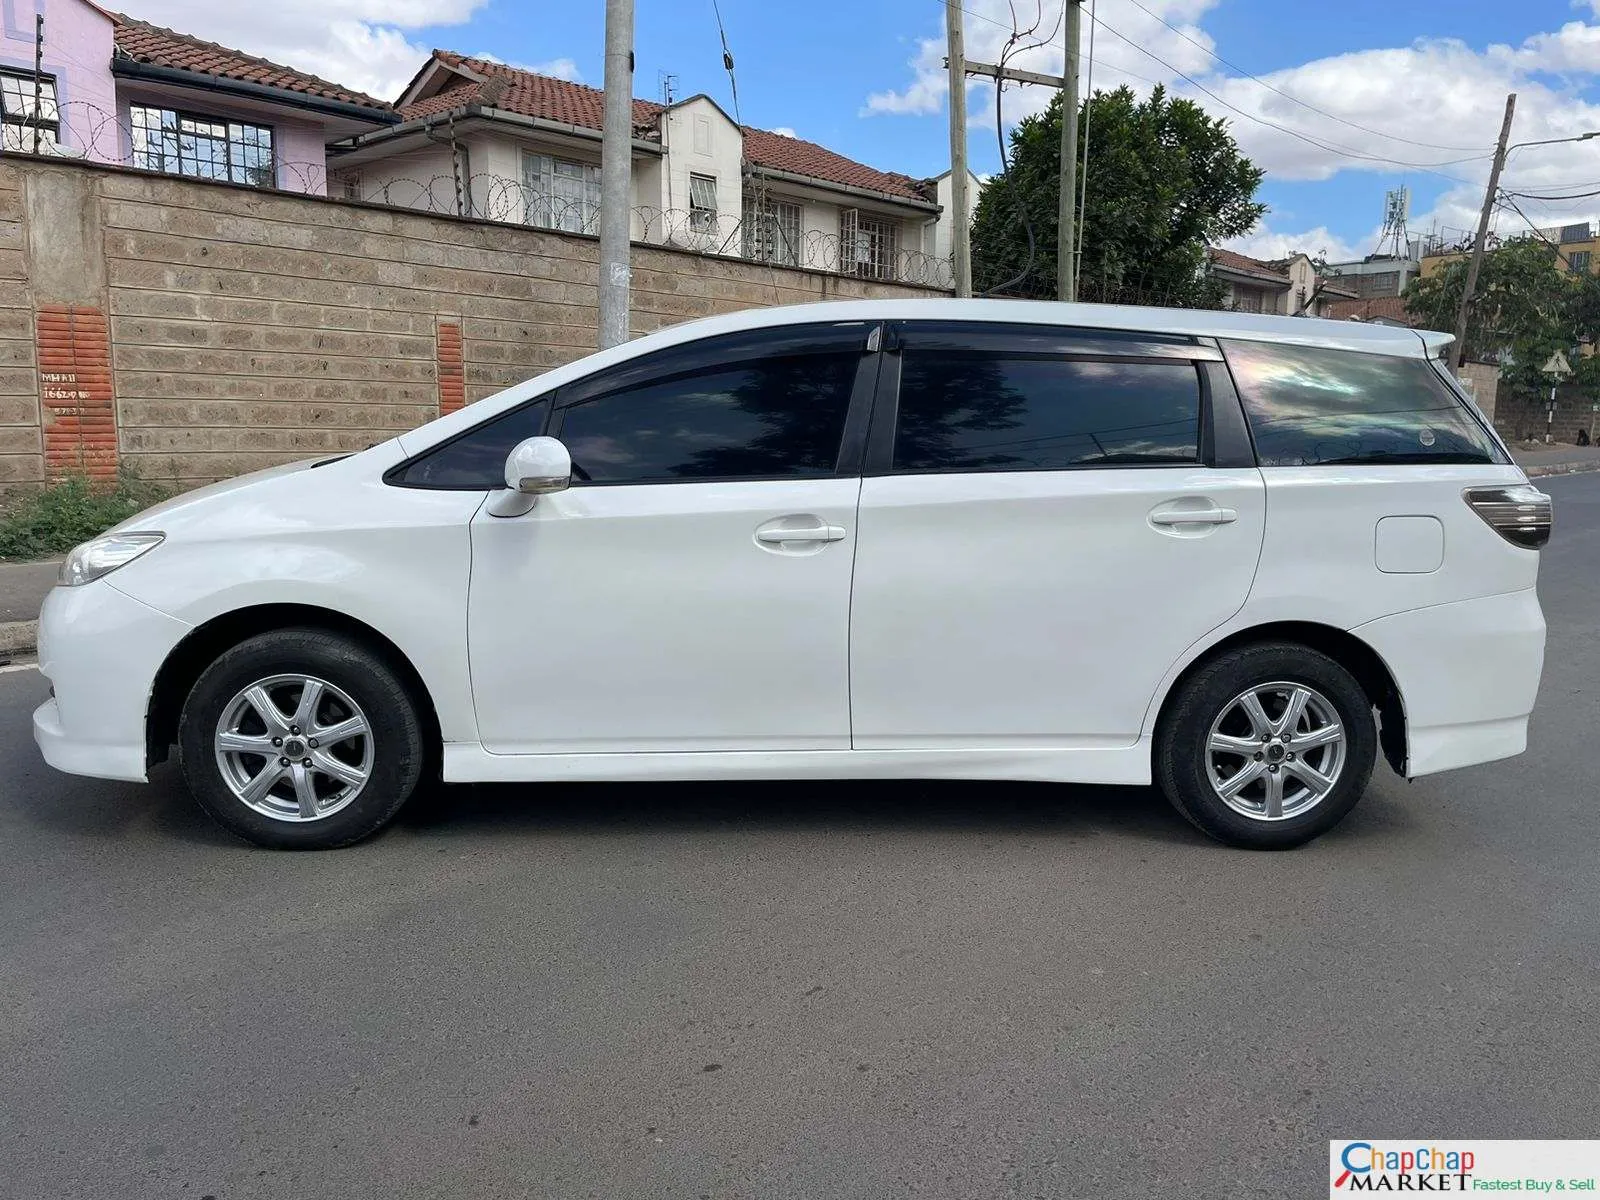 Cars Cars For Sale-Toyota WISH for sale in Kenya You Pay 30% Deposit Trade in EXCLUSIVE Hire Purchase Installments bank finance Ok 9